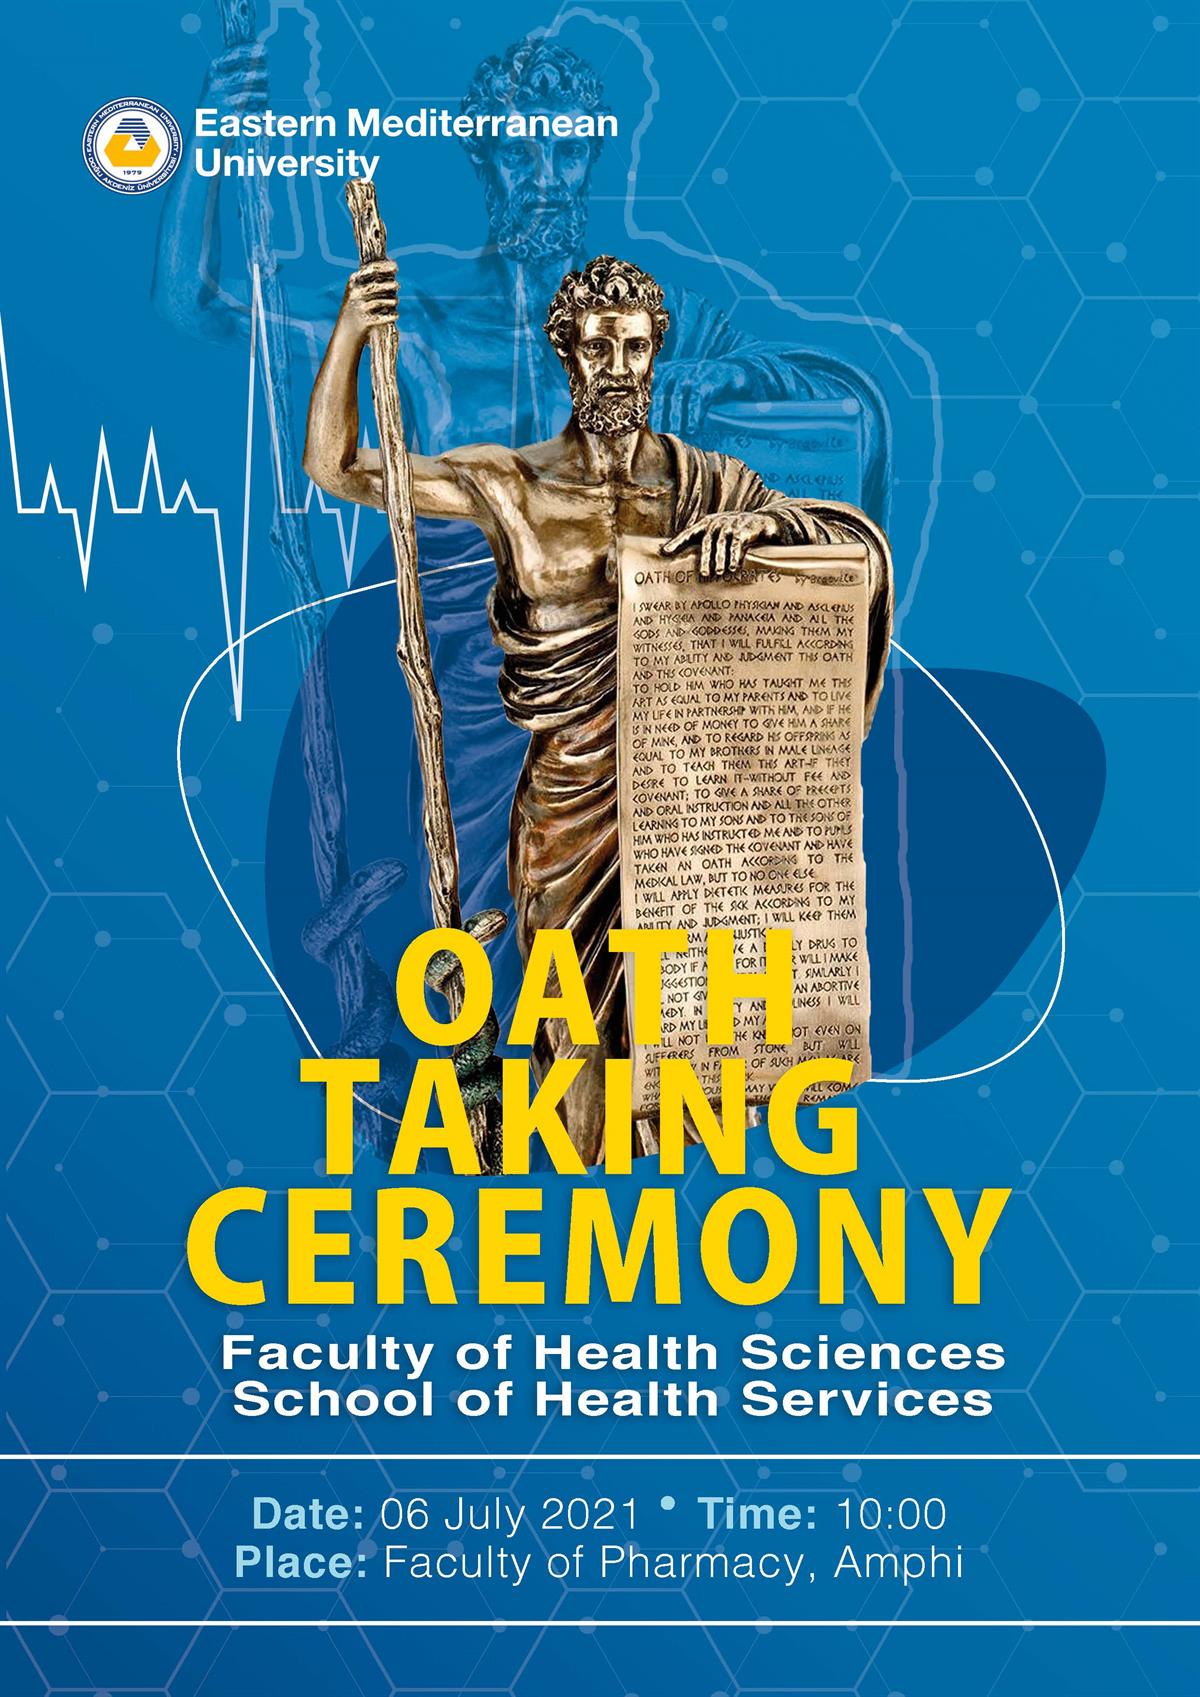 2021 Spring Semester Oath Taking Ceremony will be held on Tuesday 6th July 2021, at 10:00 AM in Faculty of Pharmacy Amphi